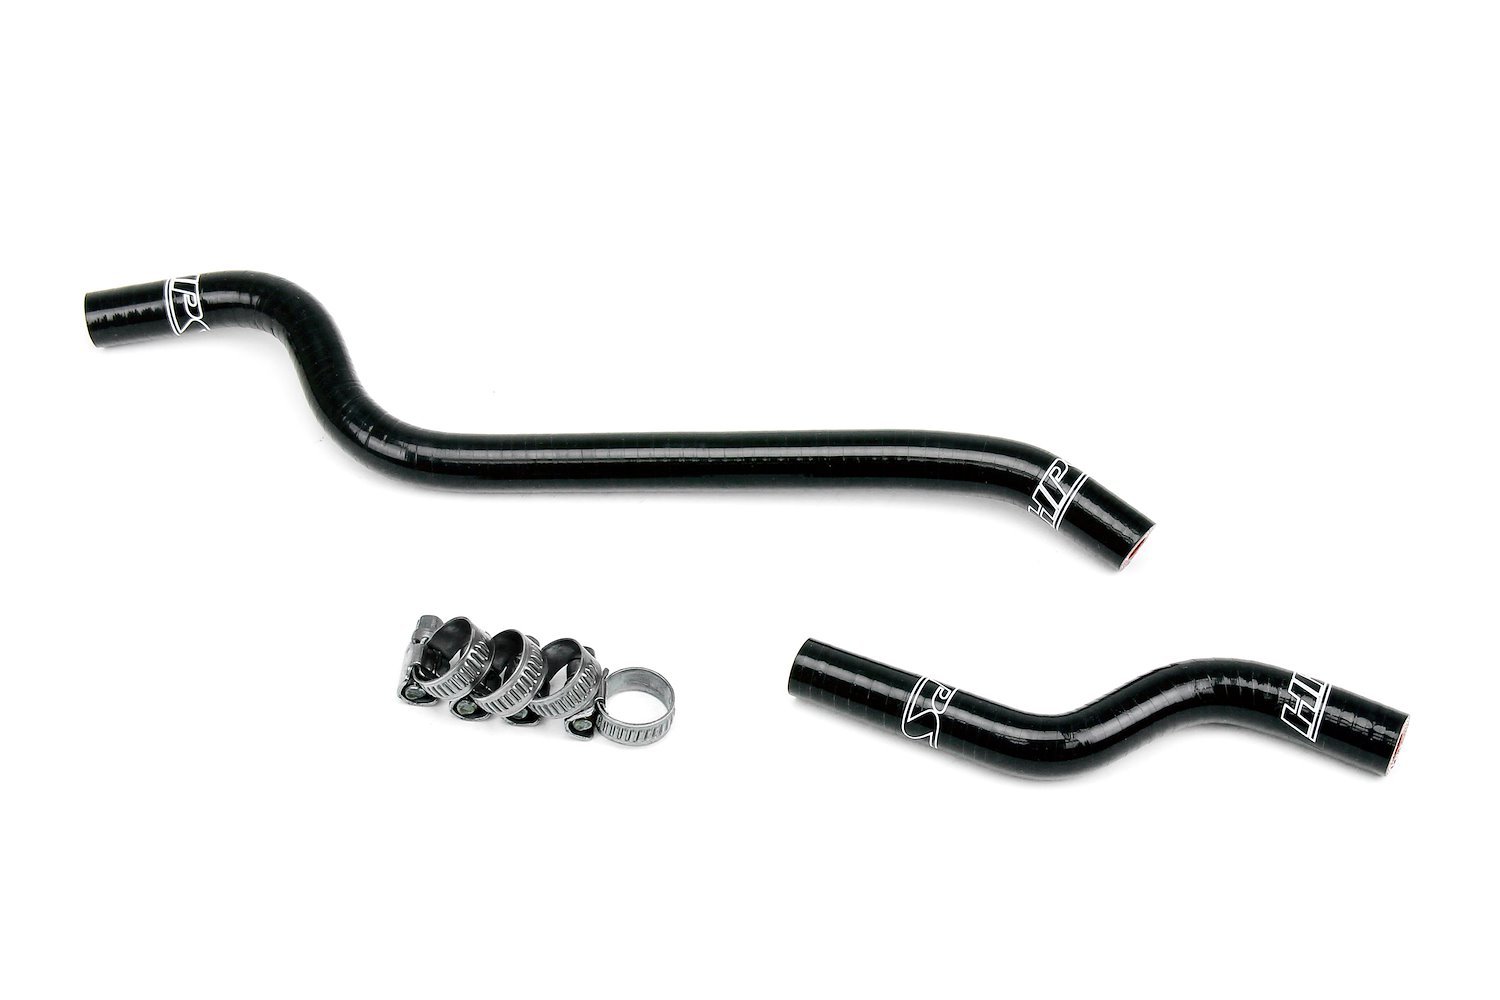 57-1873-BLK Throttle Body Coolant Hose Kit, 3-Ply Reinforced Silicone, Replaces Rubber Throttle Body Coolant Hoses